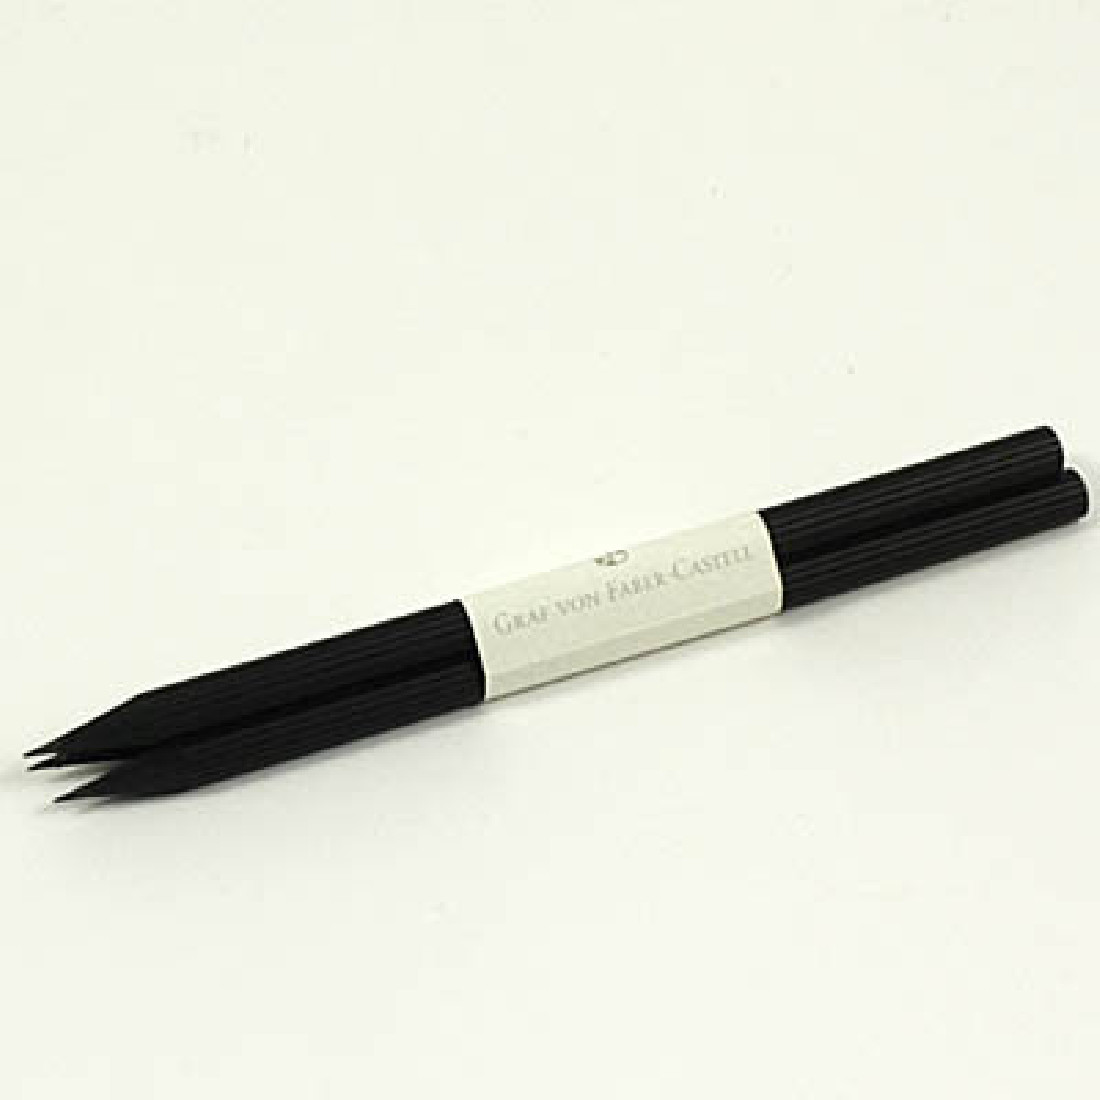 SET OF 3 BLACK  PENCILS WITH DIPPED END 118638 GRAF VON FABER CASTELL